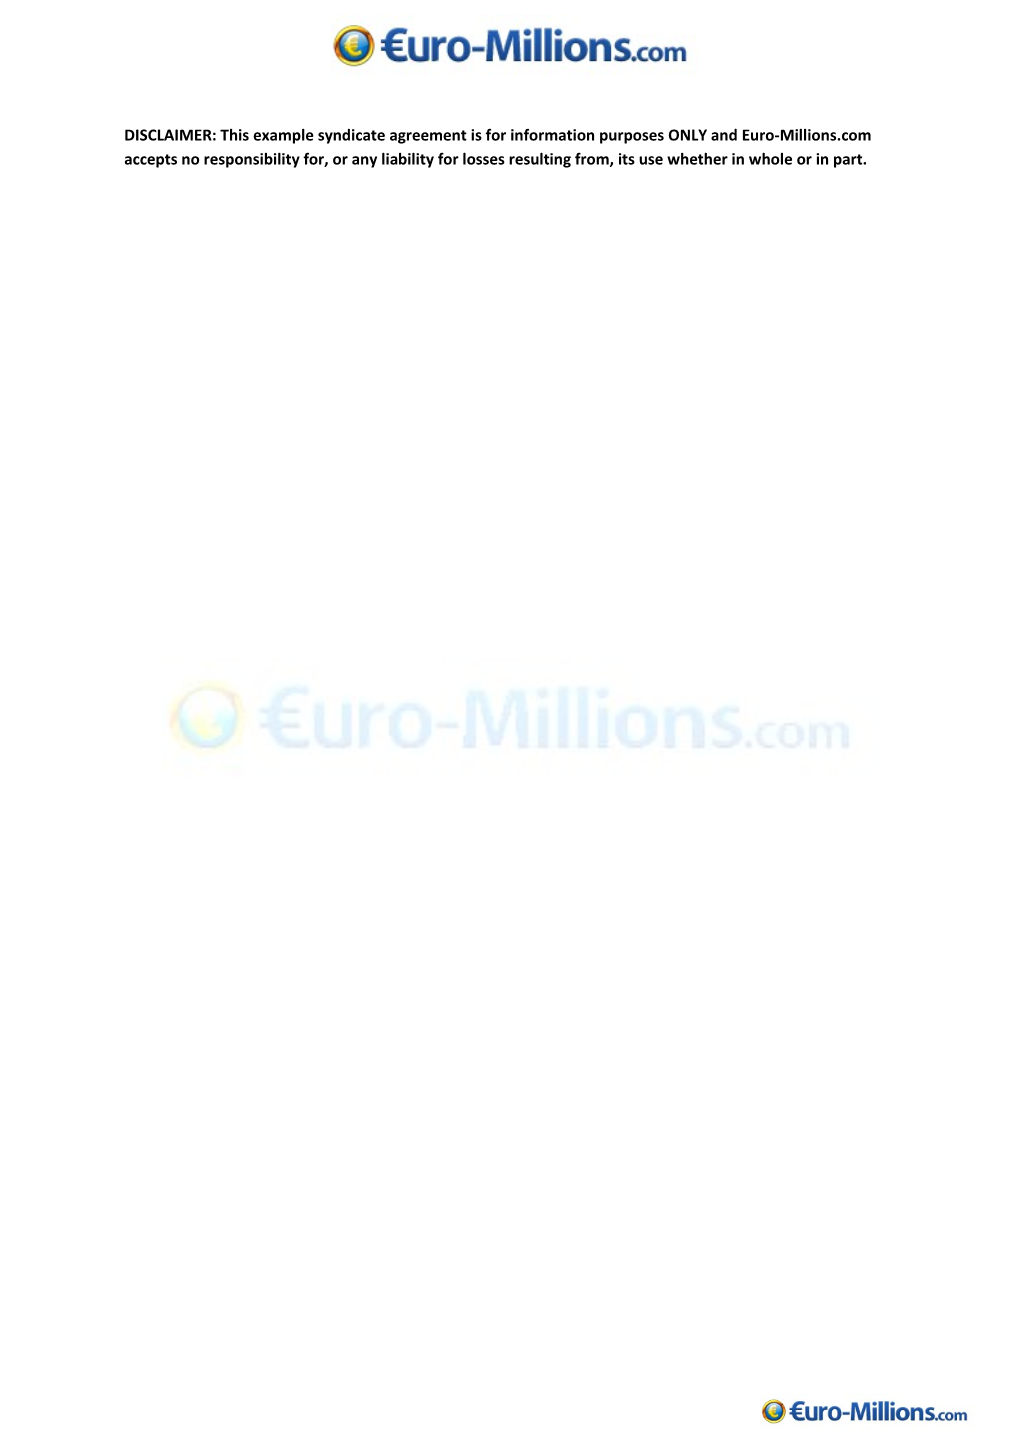 Euromillions Syndicate Agreement